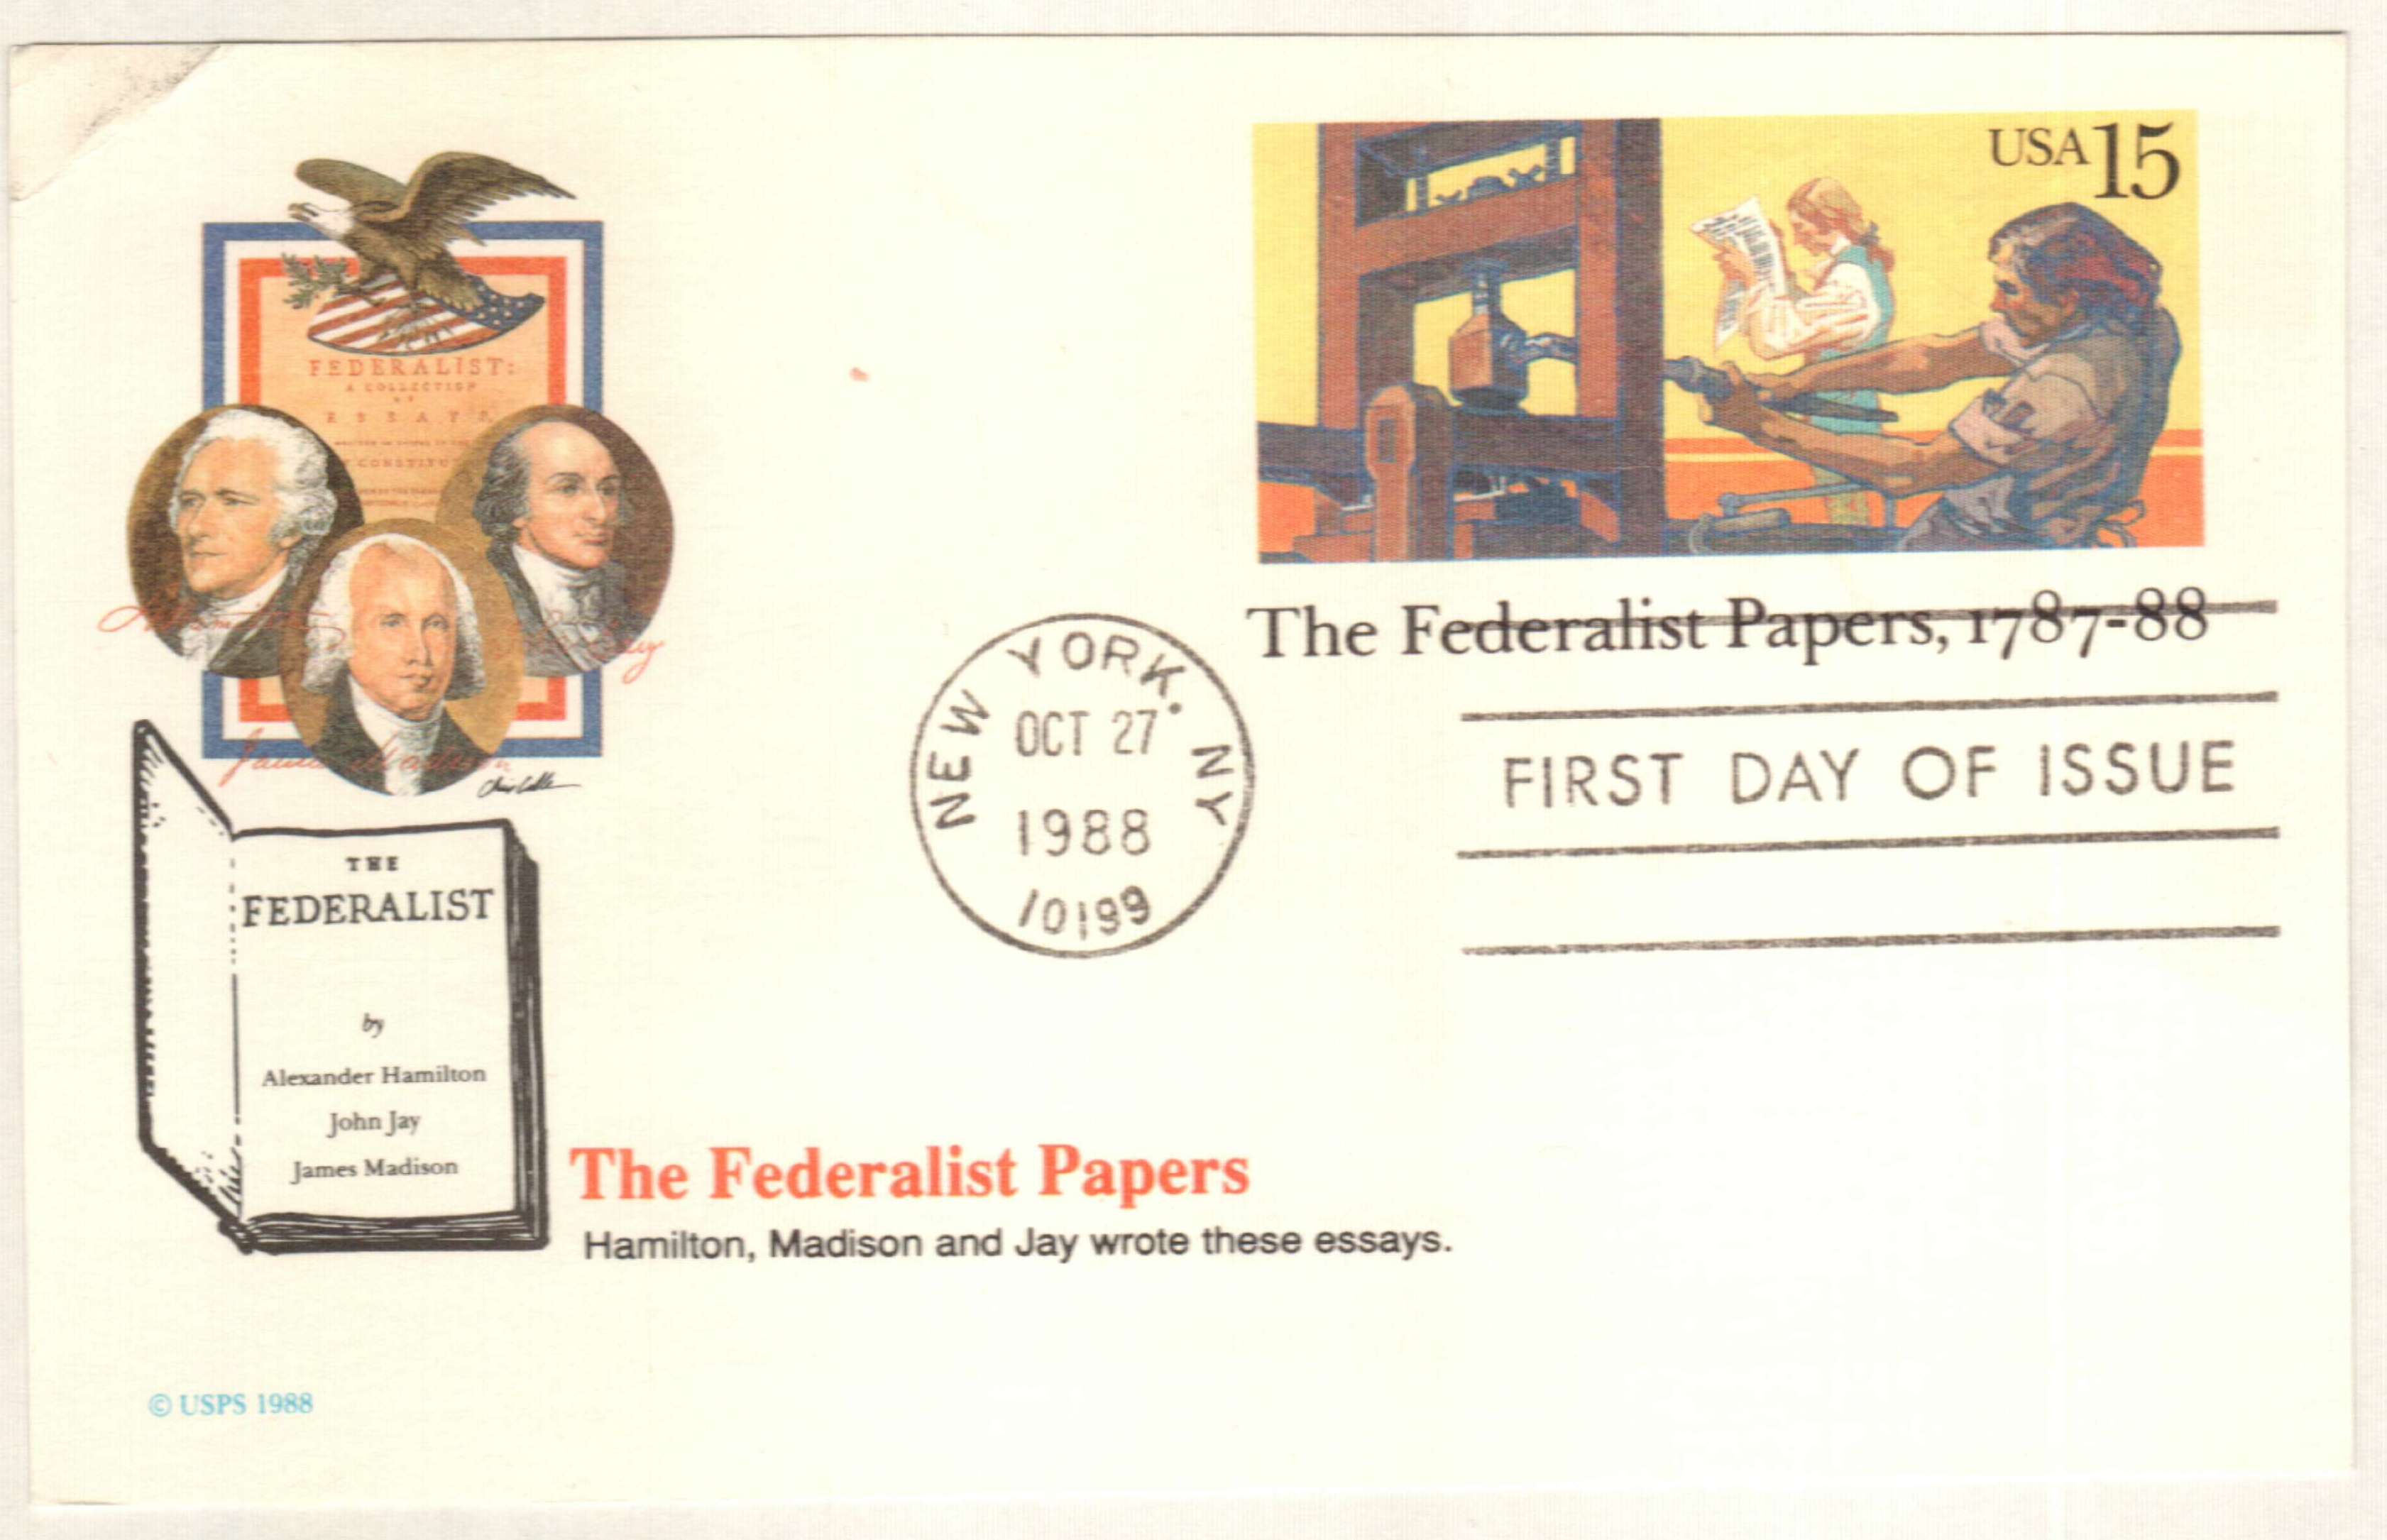 U.S. #UX126 – Federalist Papers First Day Postal Card.